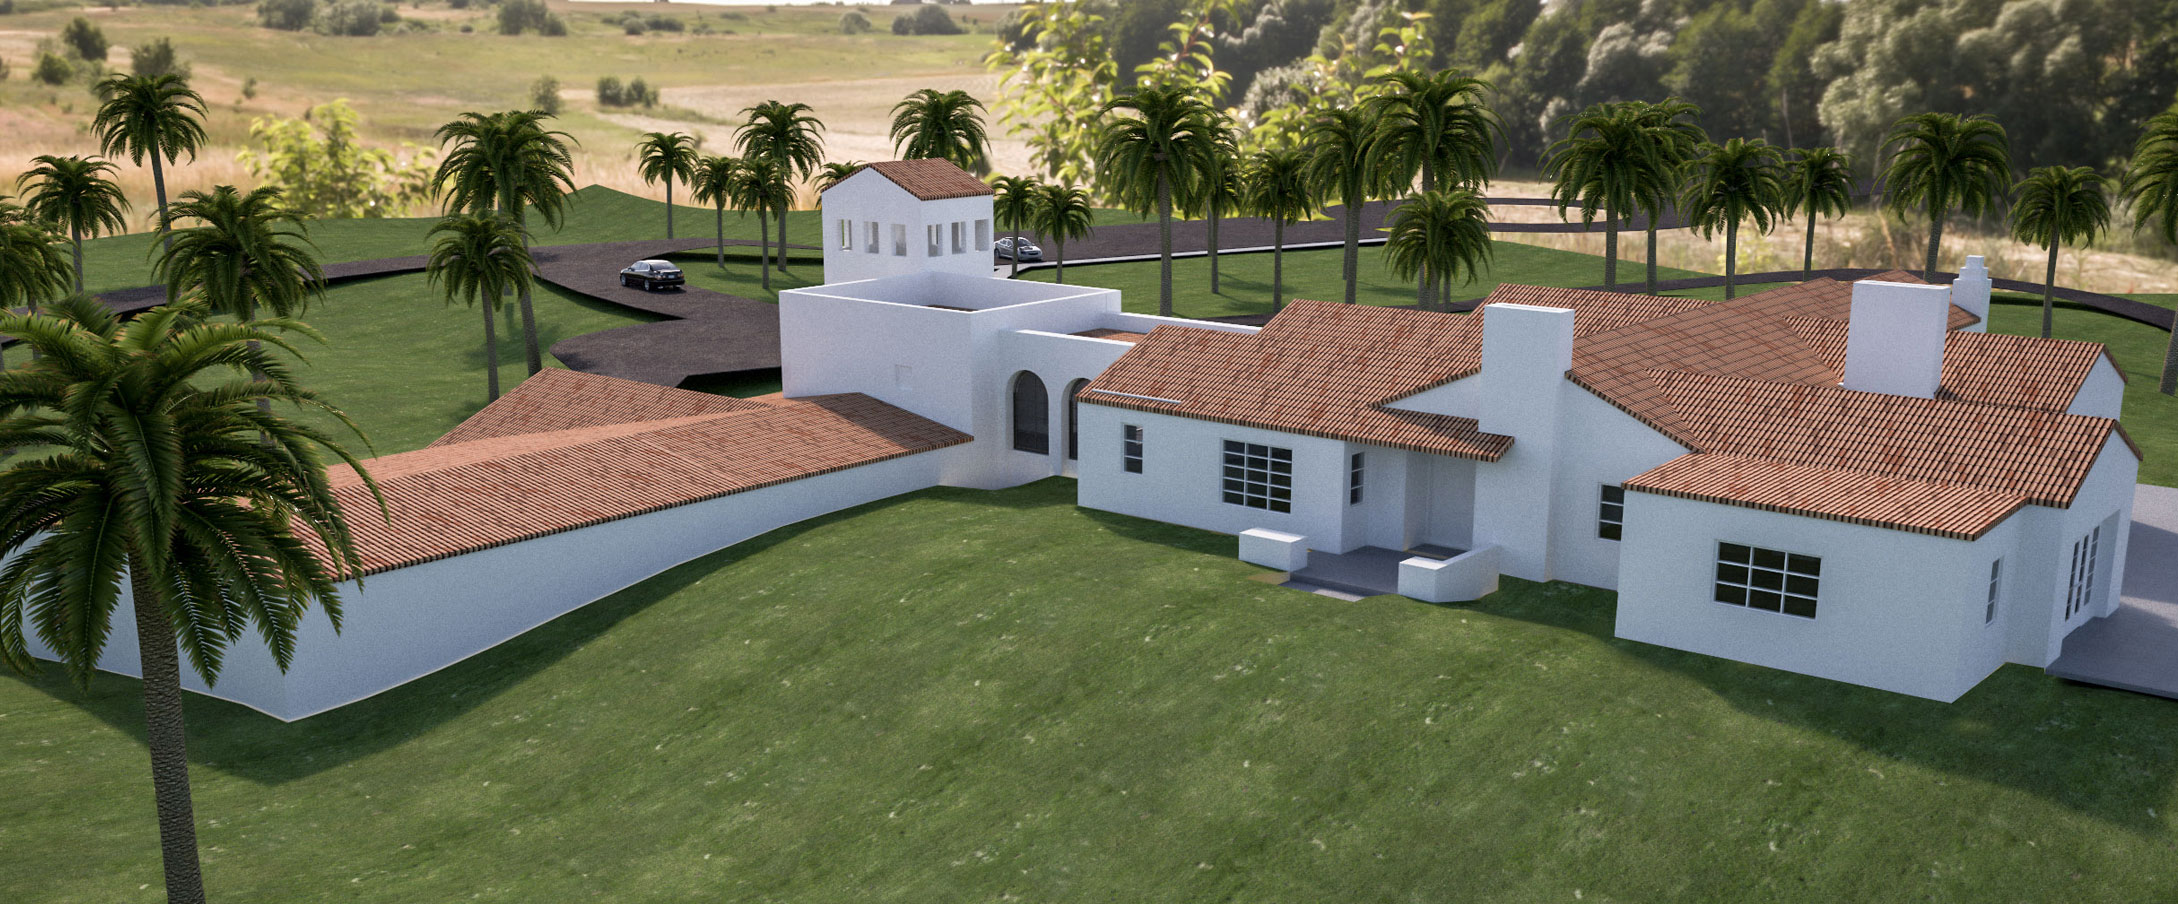 Rendering of the new Litchfield Heritage Museum